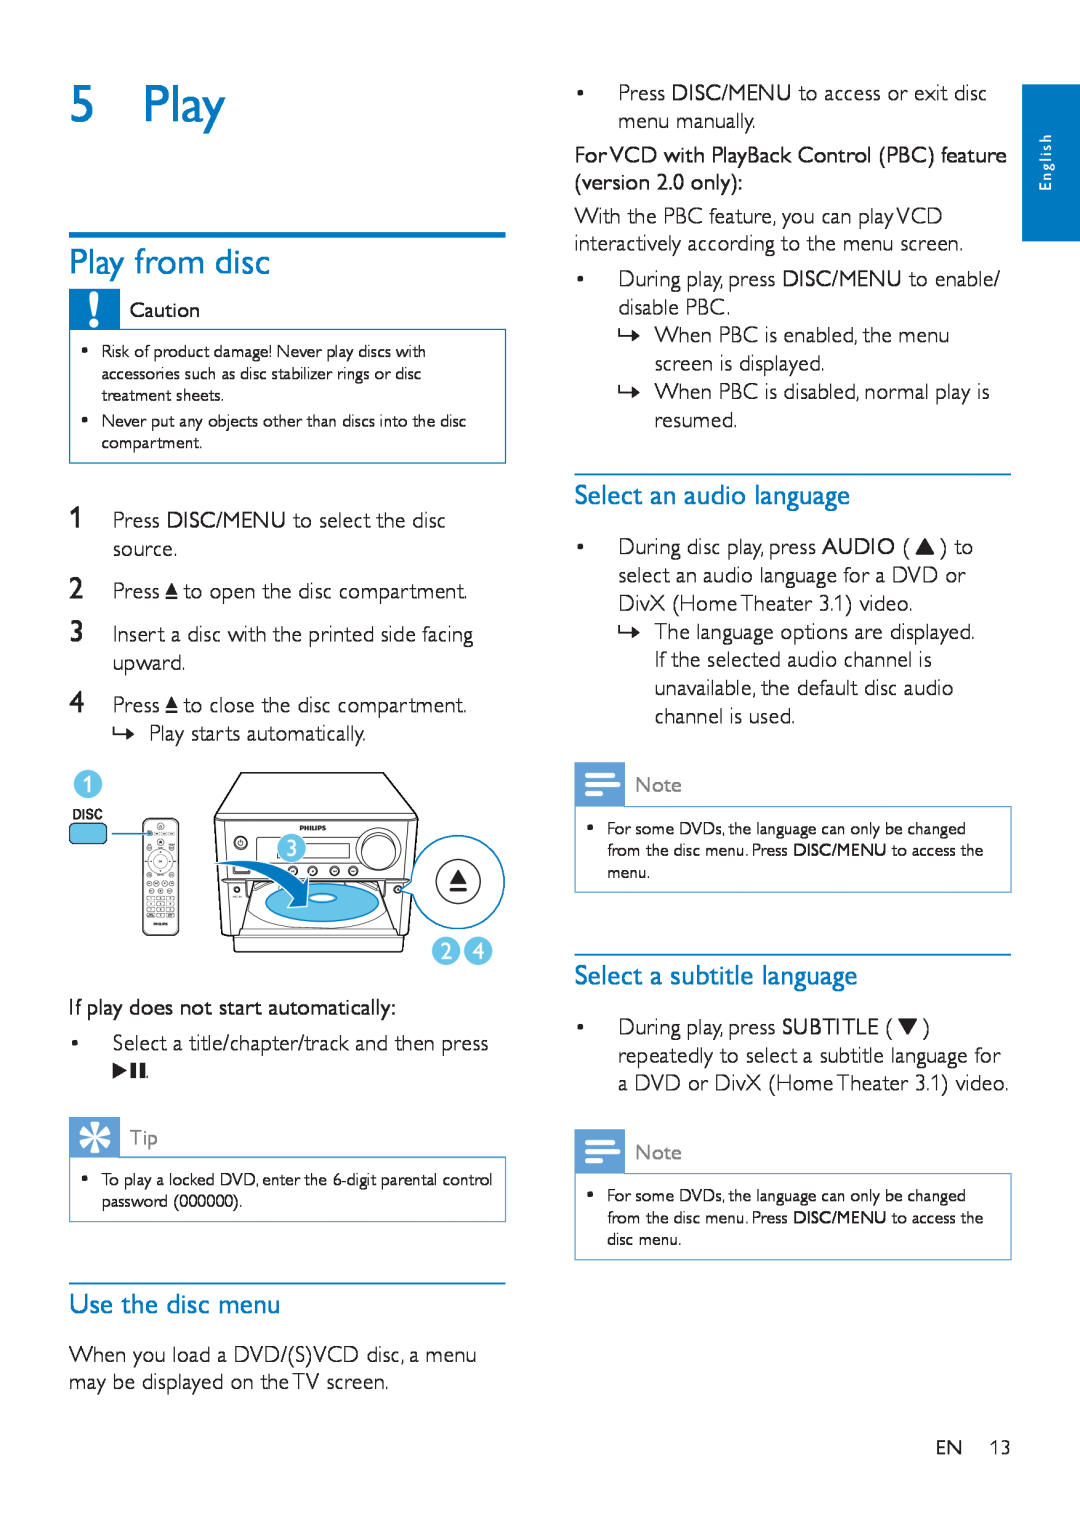 Philips MCD5110 user manual Play from disc, Select an audio language, Use the disc menu, Select a subtitle language 